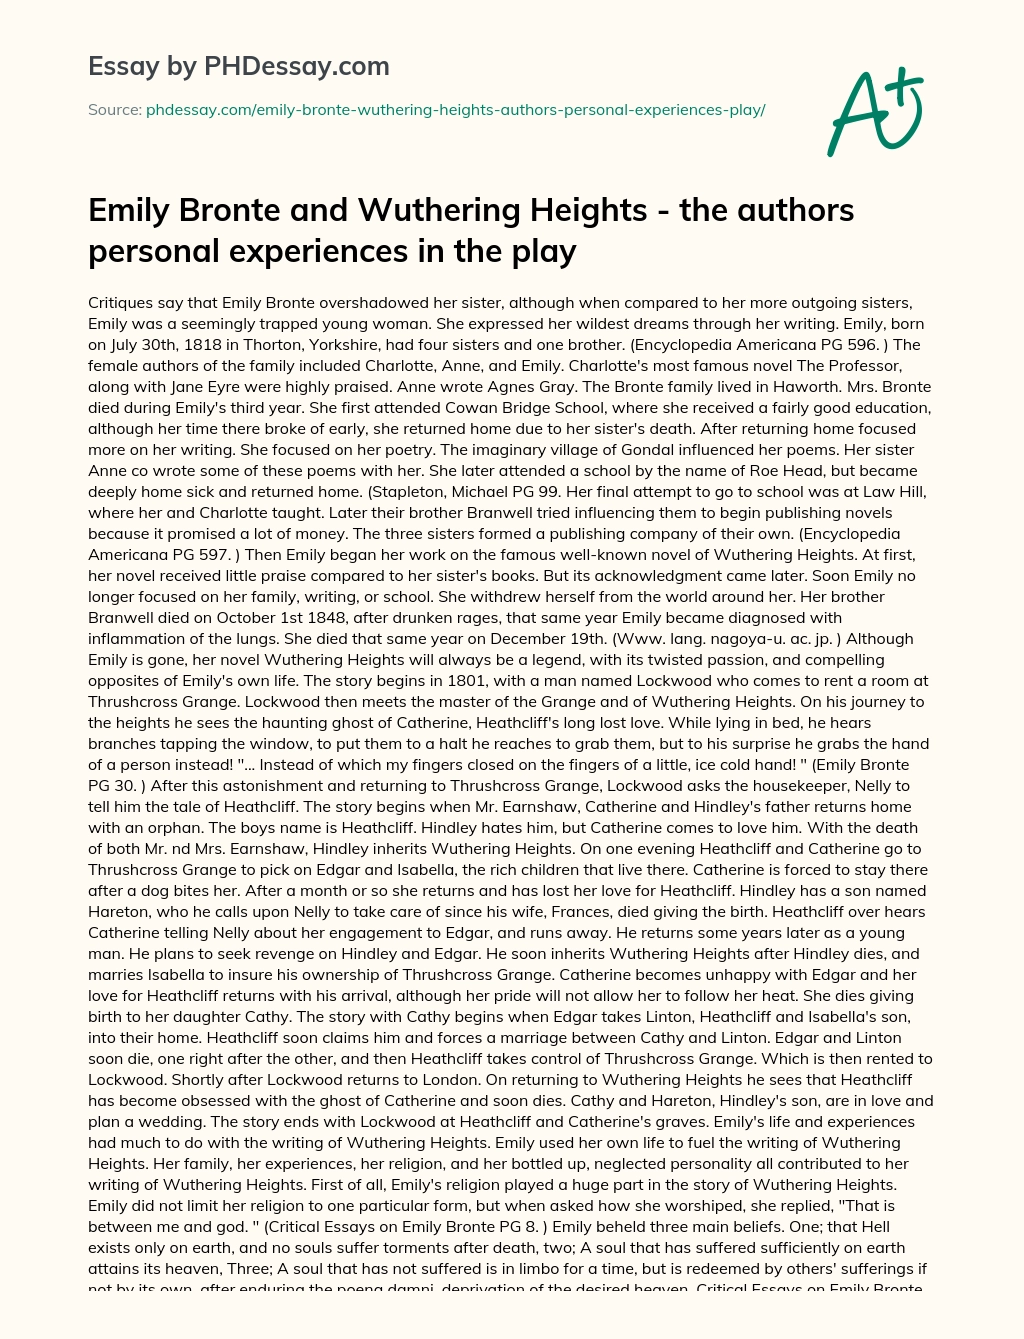 Emily Bronte and Wuthering Heights – the authors personal experiences in the play essay